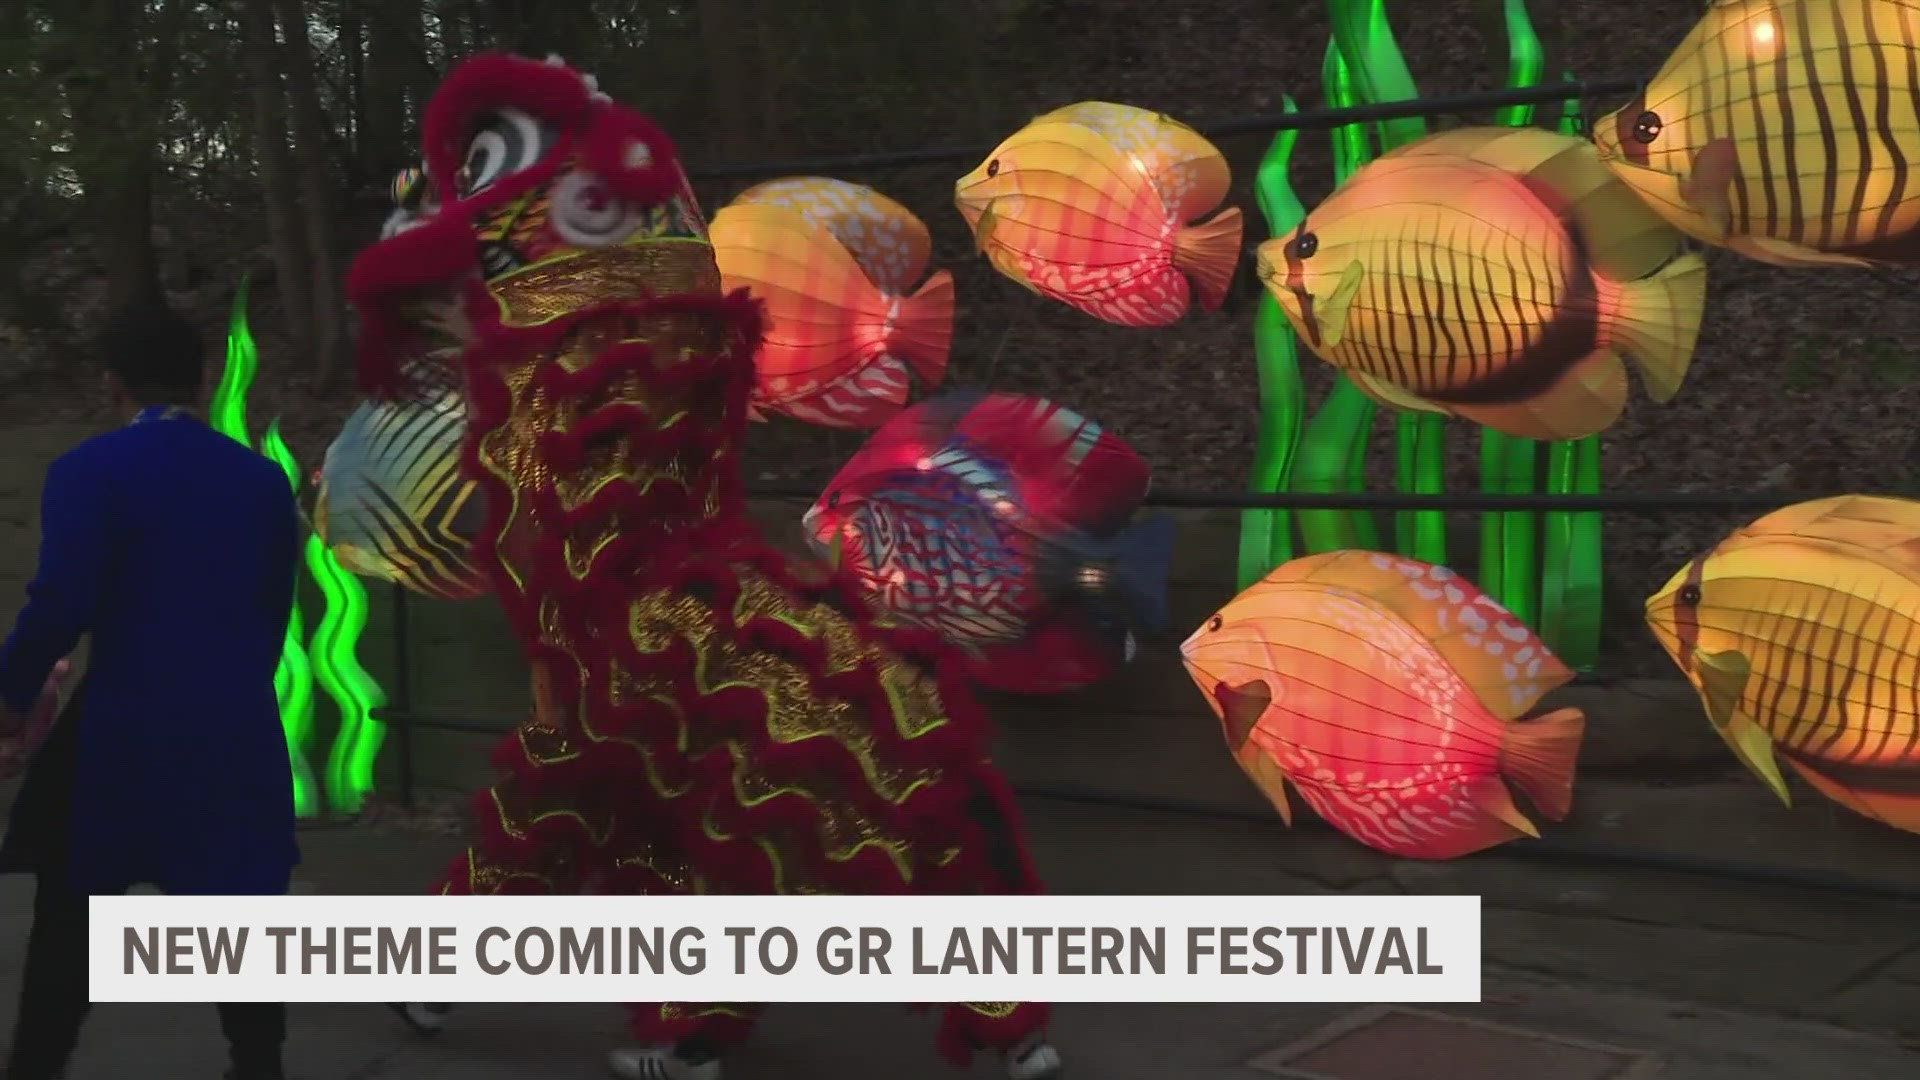 The Lantern Festival is returning to John Ball Zoo for a second year with a new theme.